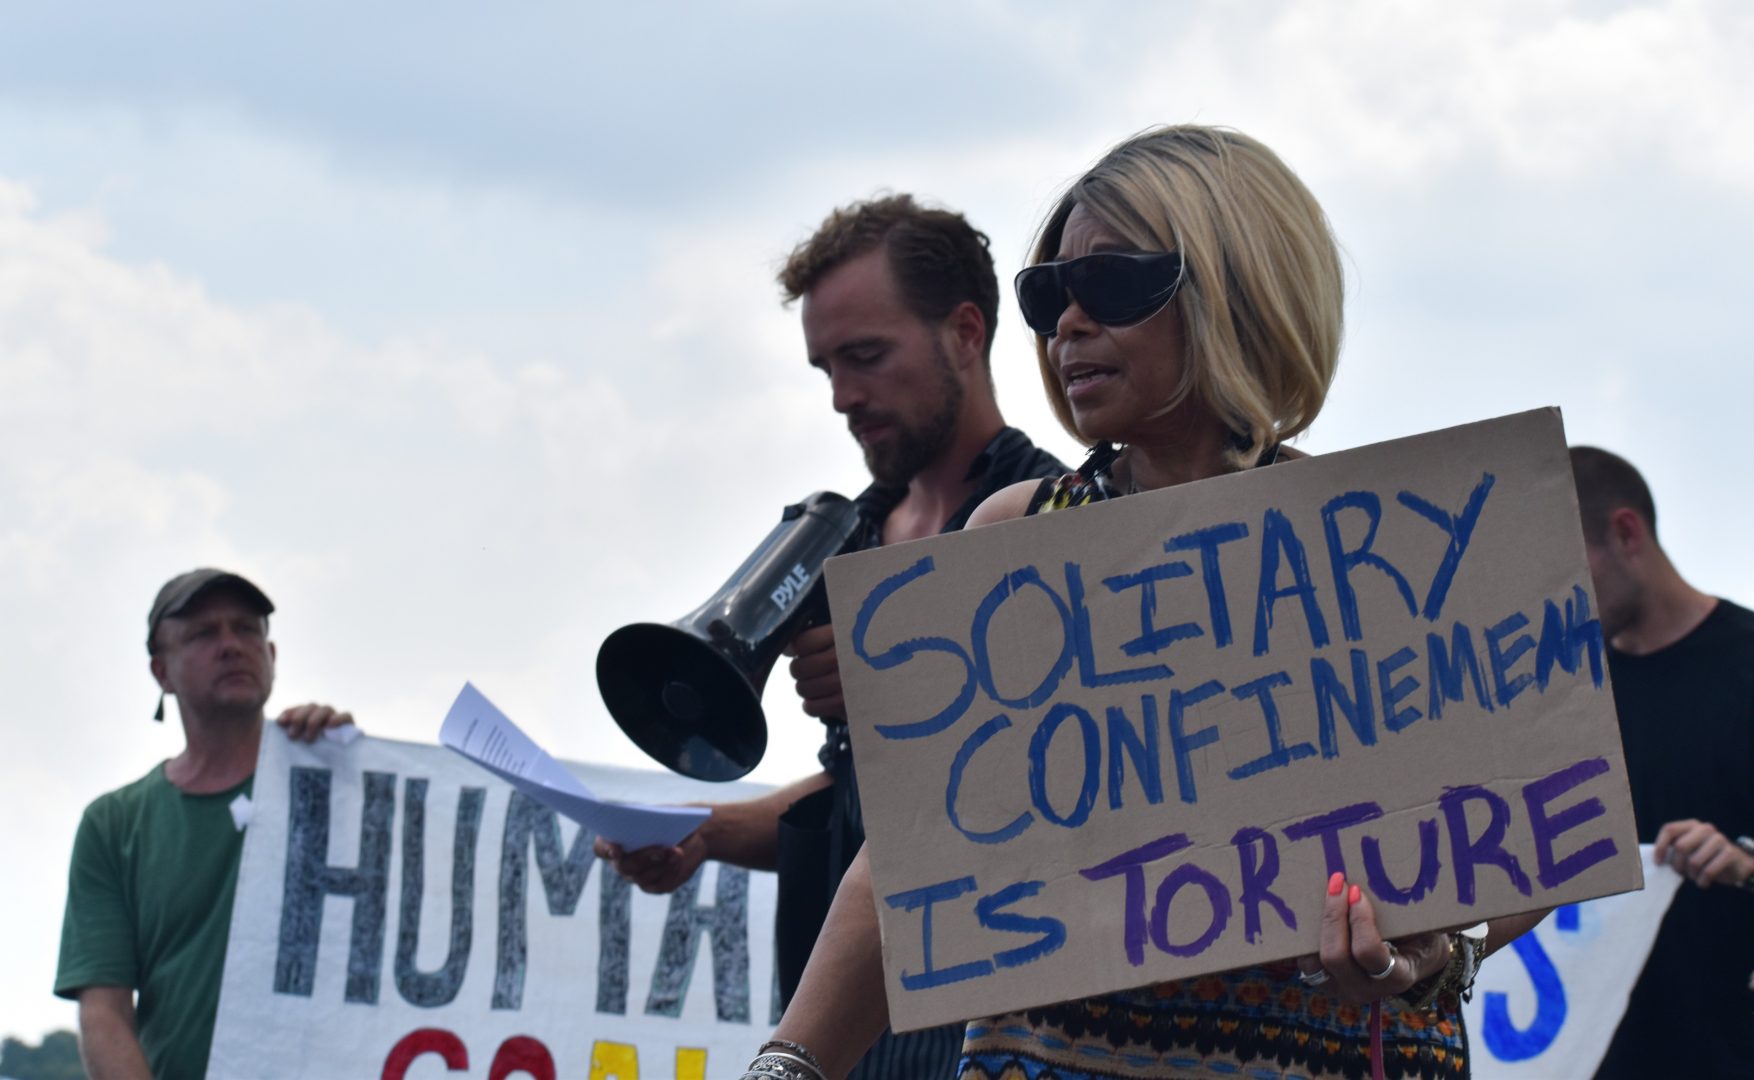 Members of the group Human Rights Coalition speak at a rally Friday, Aug. 2, 2019 at Department of Corrections headquarters in Mechanicsburg, Cumberland County. 